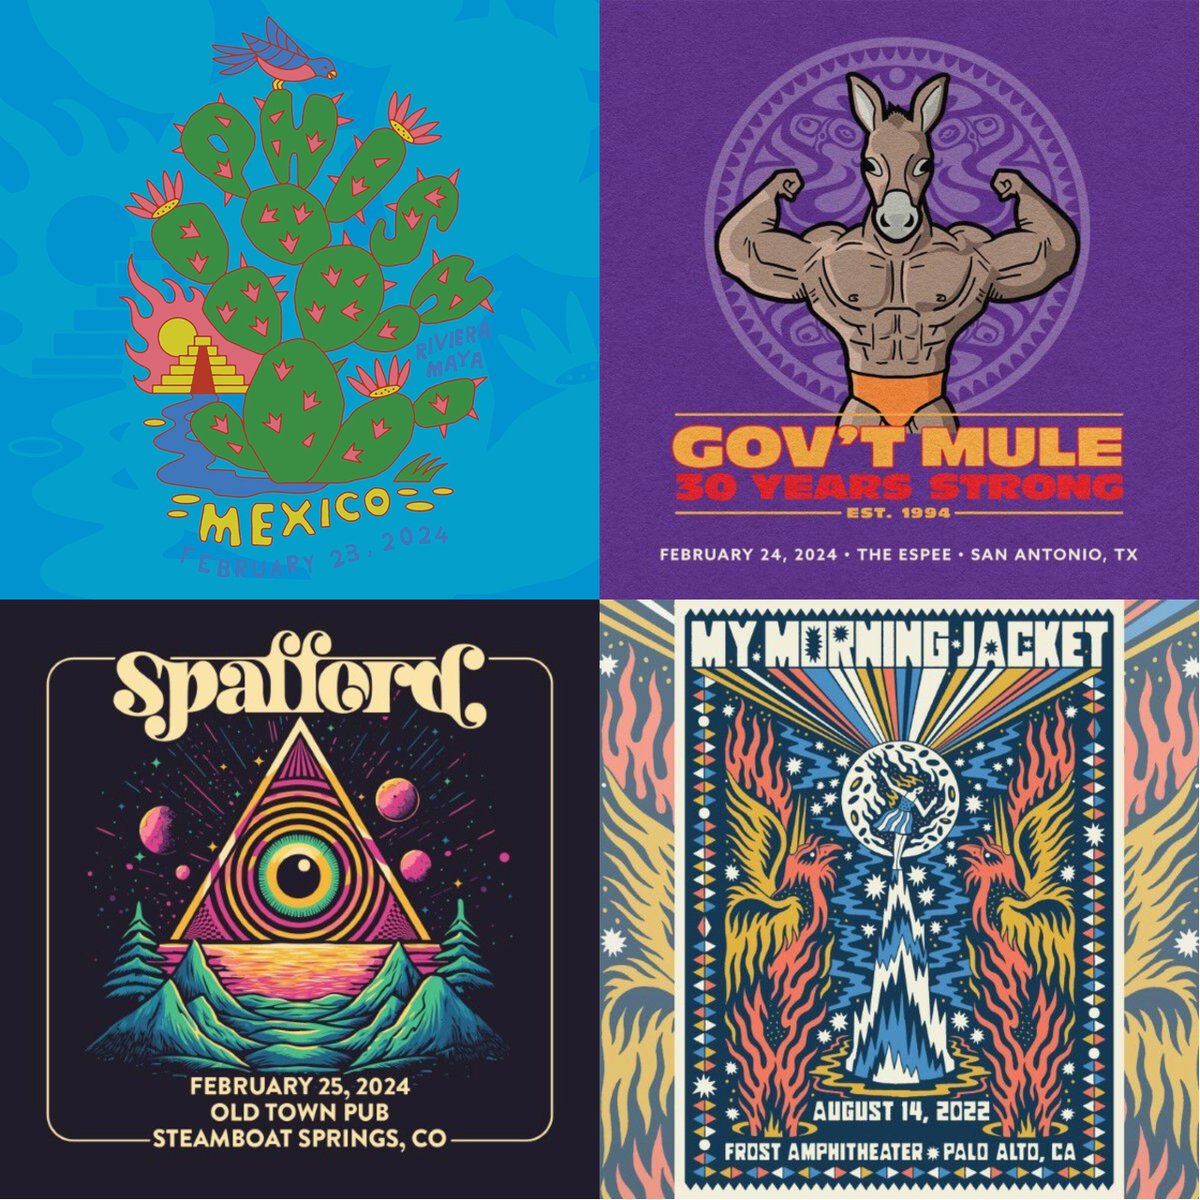 Our latest #WeeklyLiveStash features the 40 minute 'Chalkdust Torture' from @Phish's hot run in Mexico, plus Duane Trucks' sit-in with @govtmuleband, and more new tracks from @spaffordmusic, @BigSomething, and @mymorningjacket. Listen live at 5PM ET on nugs Radio @SiriusXM…